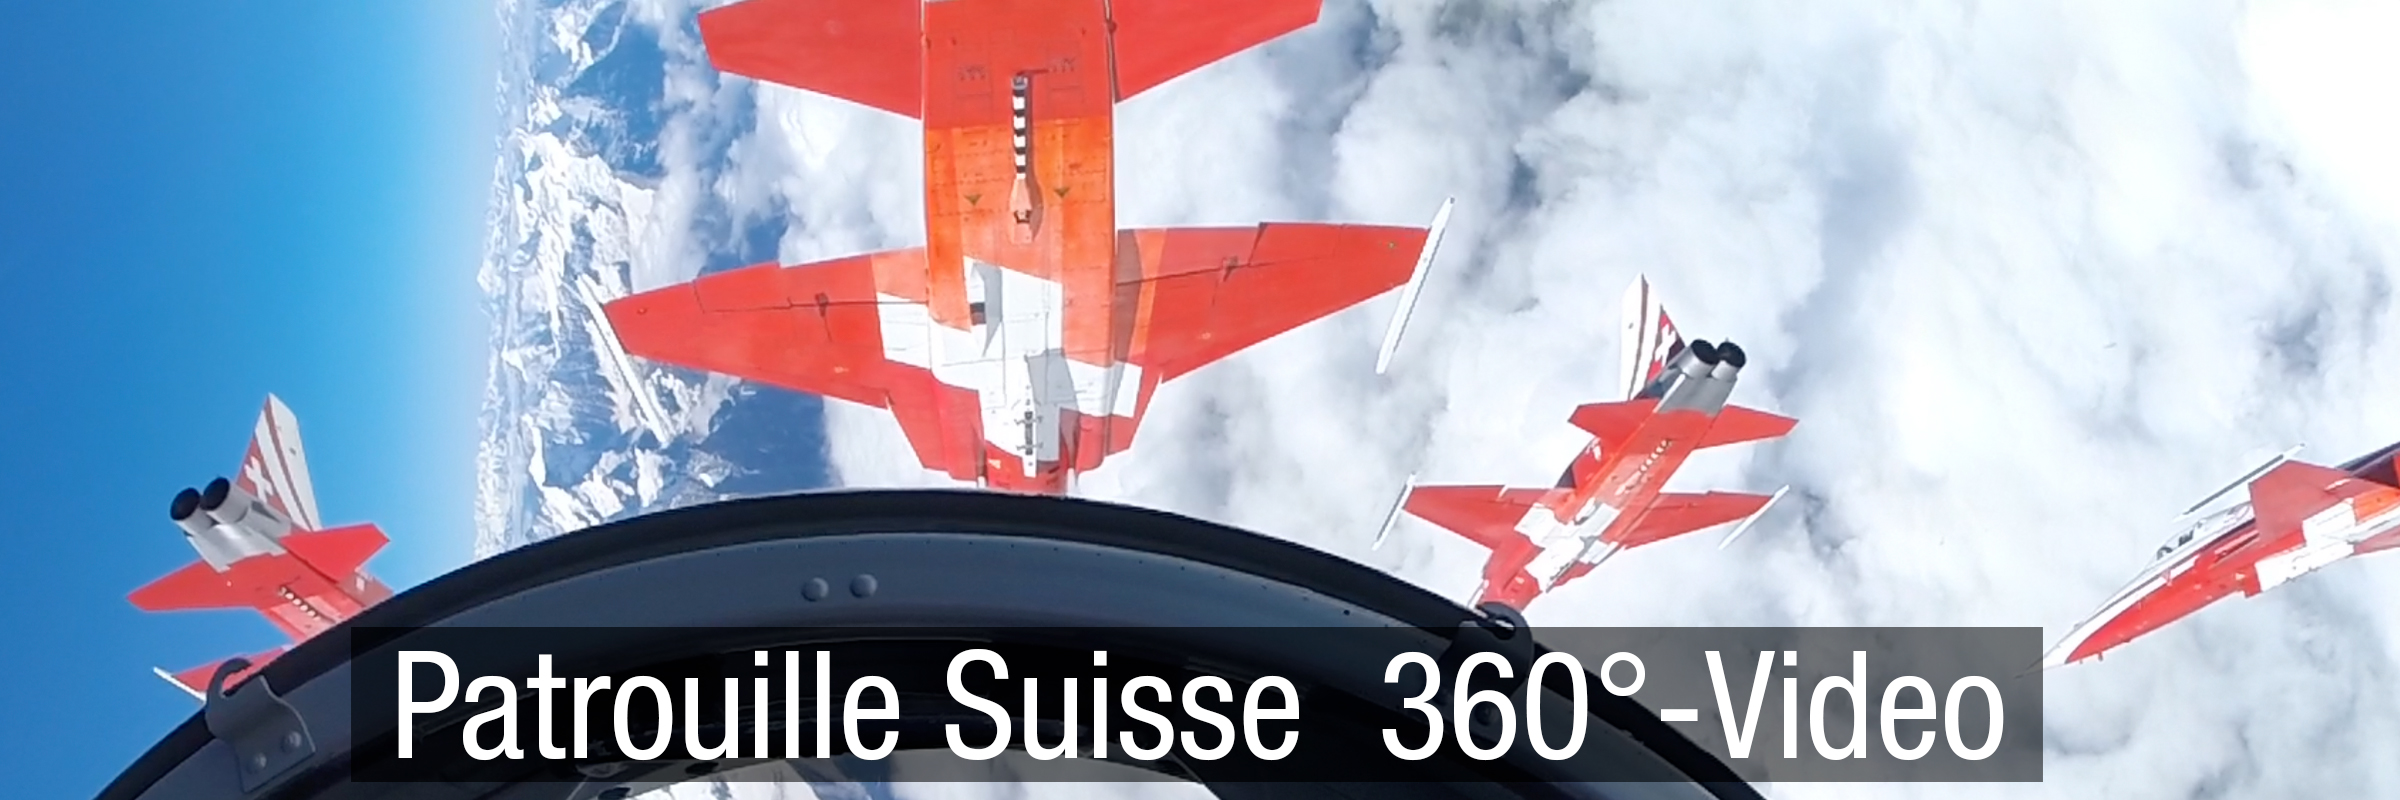 Swiss Air Force Patrouille Suisse 360-Video